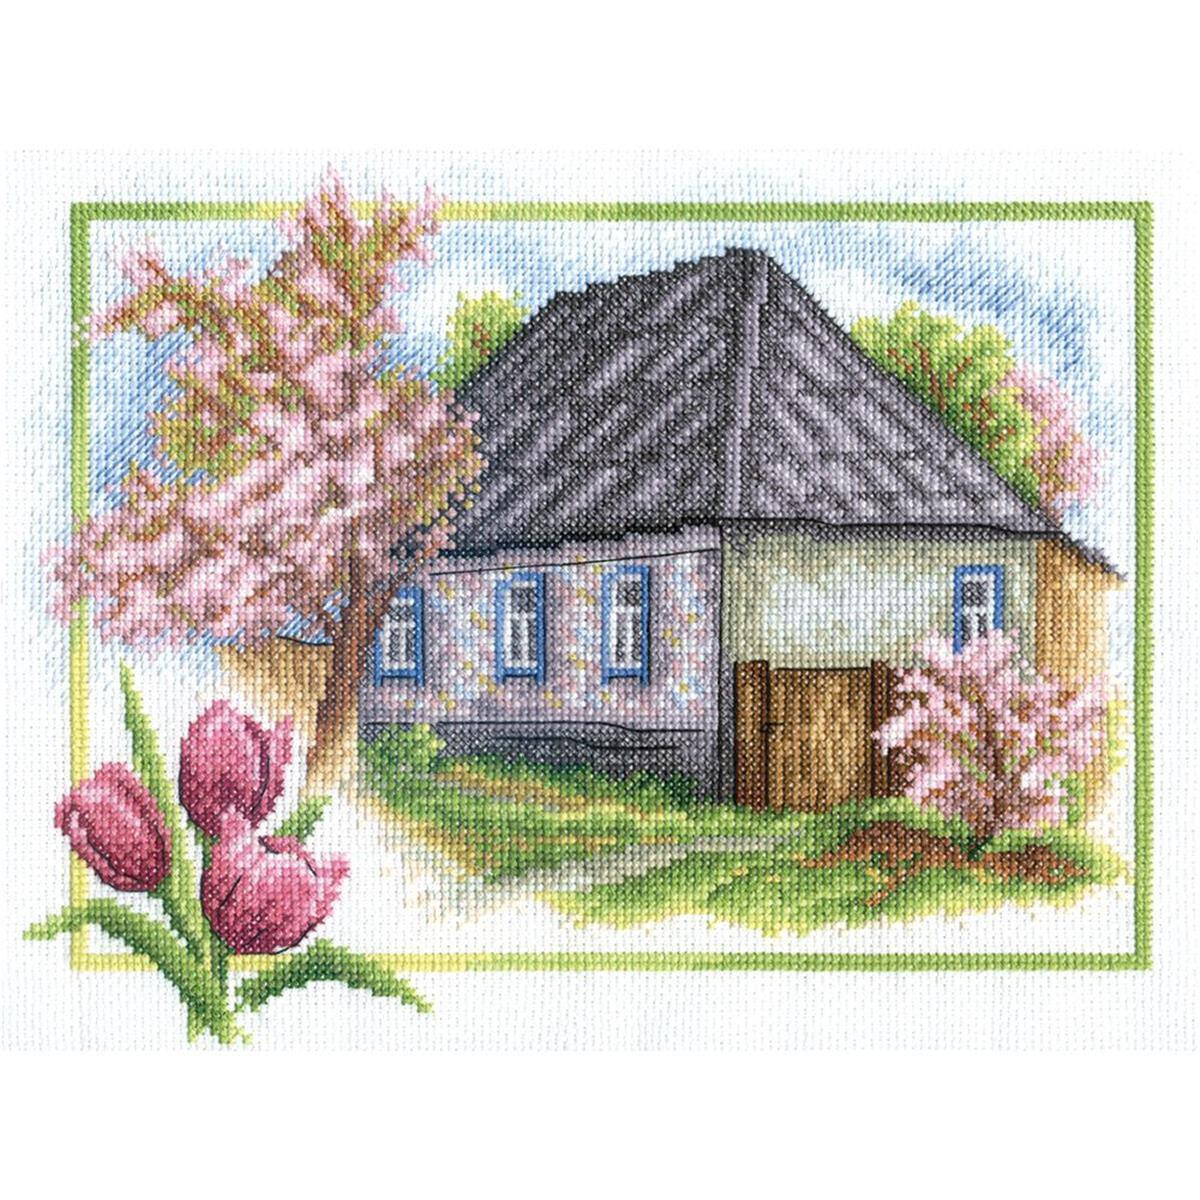 Panna counted cross stitch kit "Rural Spring"...